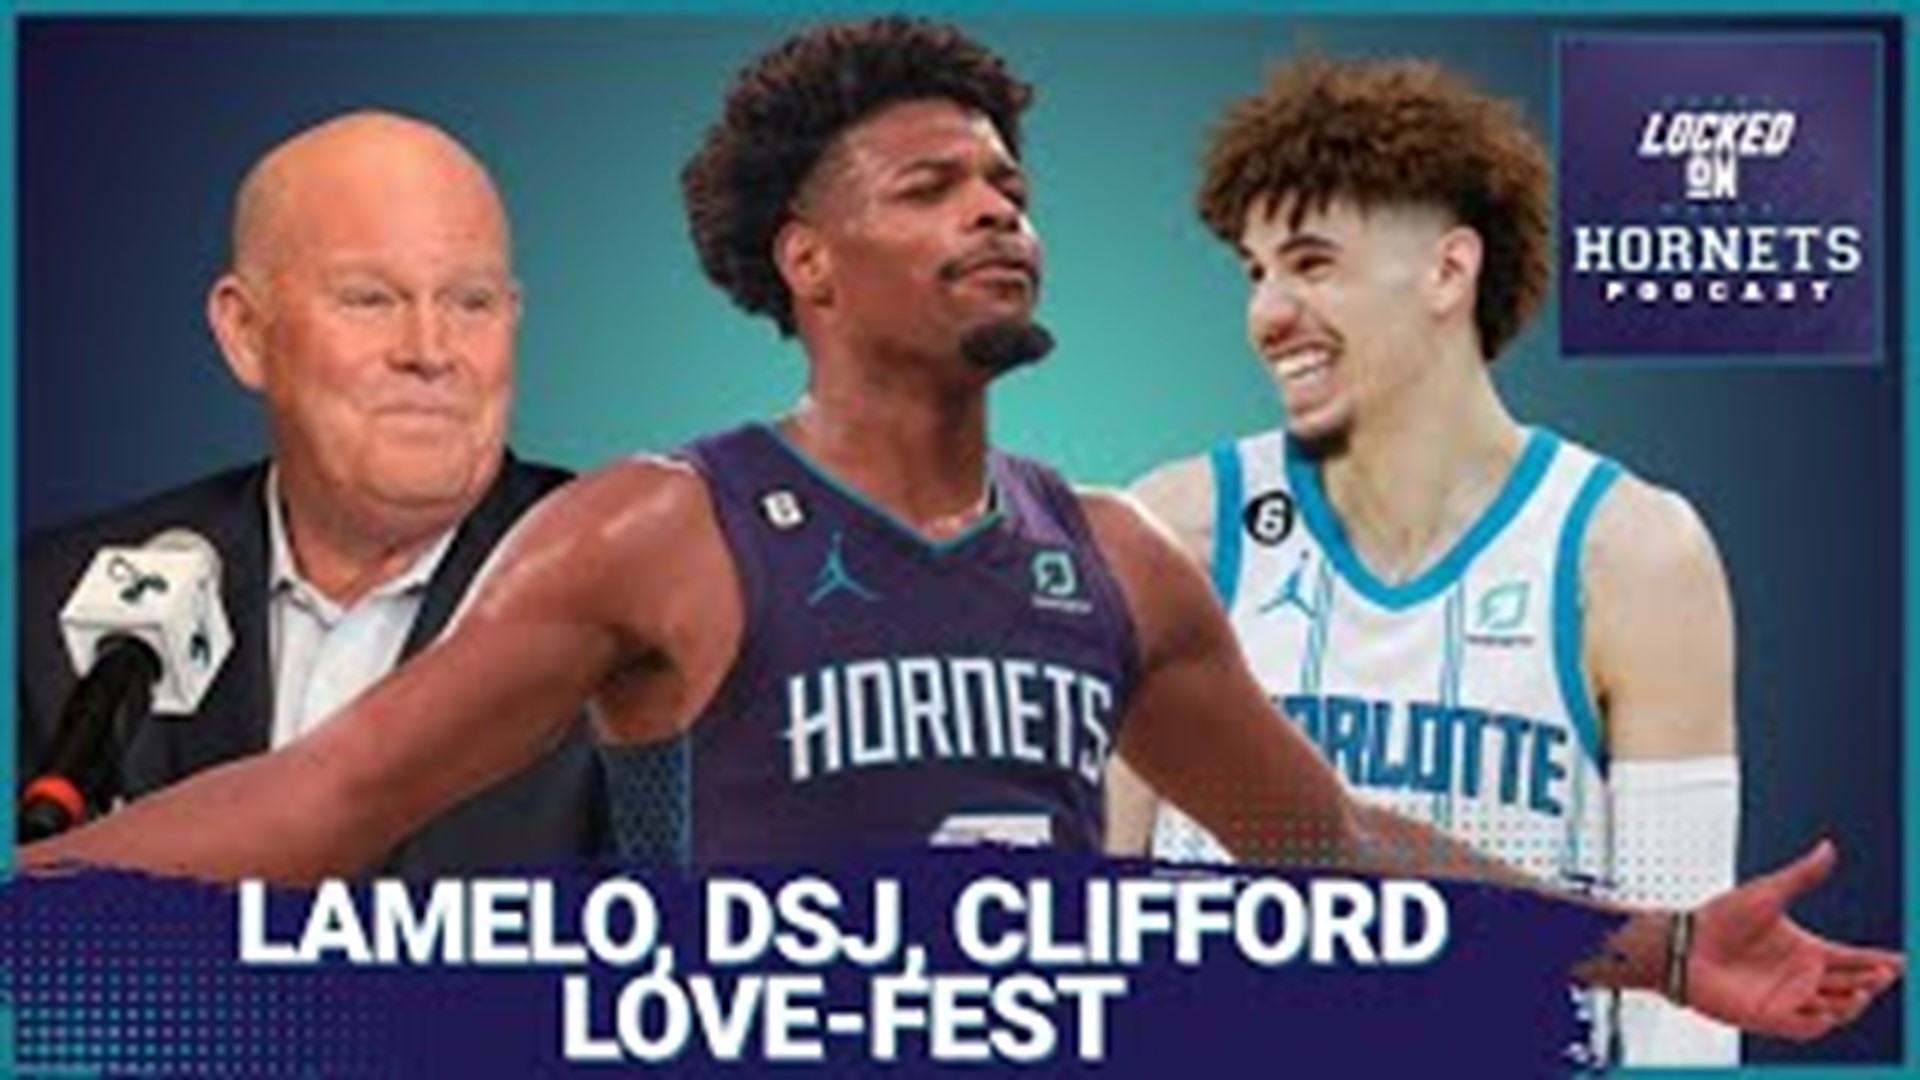 Looking in on the love fest between LaMelo, DSJ and Steve Clifford. That and more on Locked on Hornets.